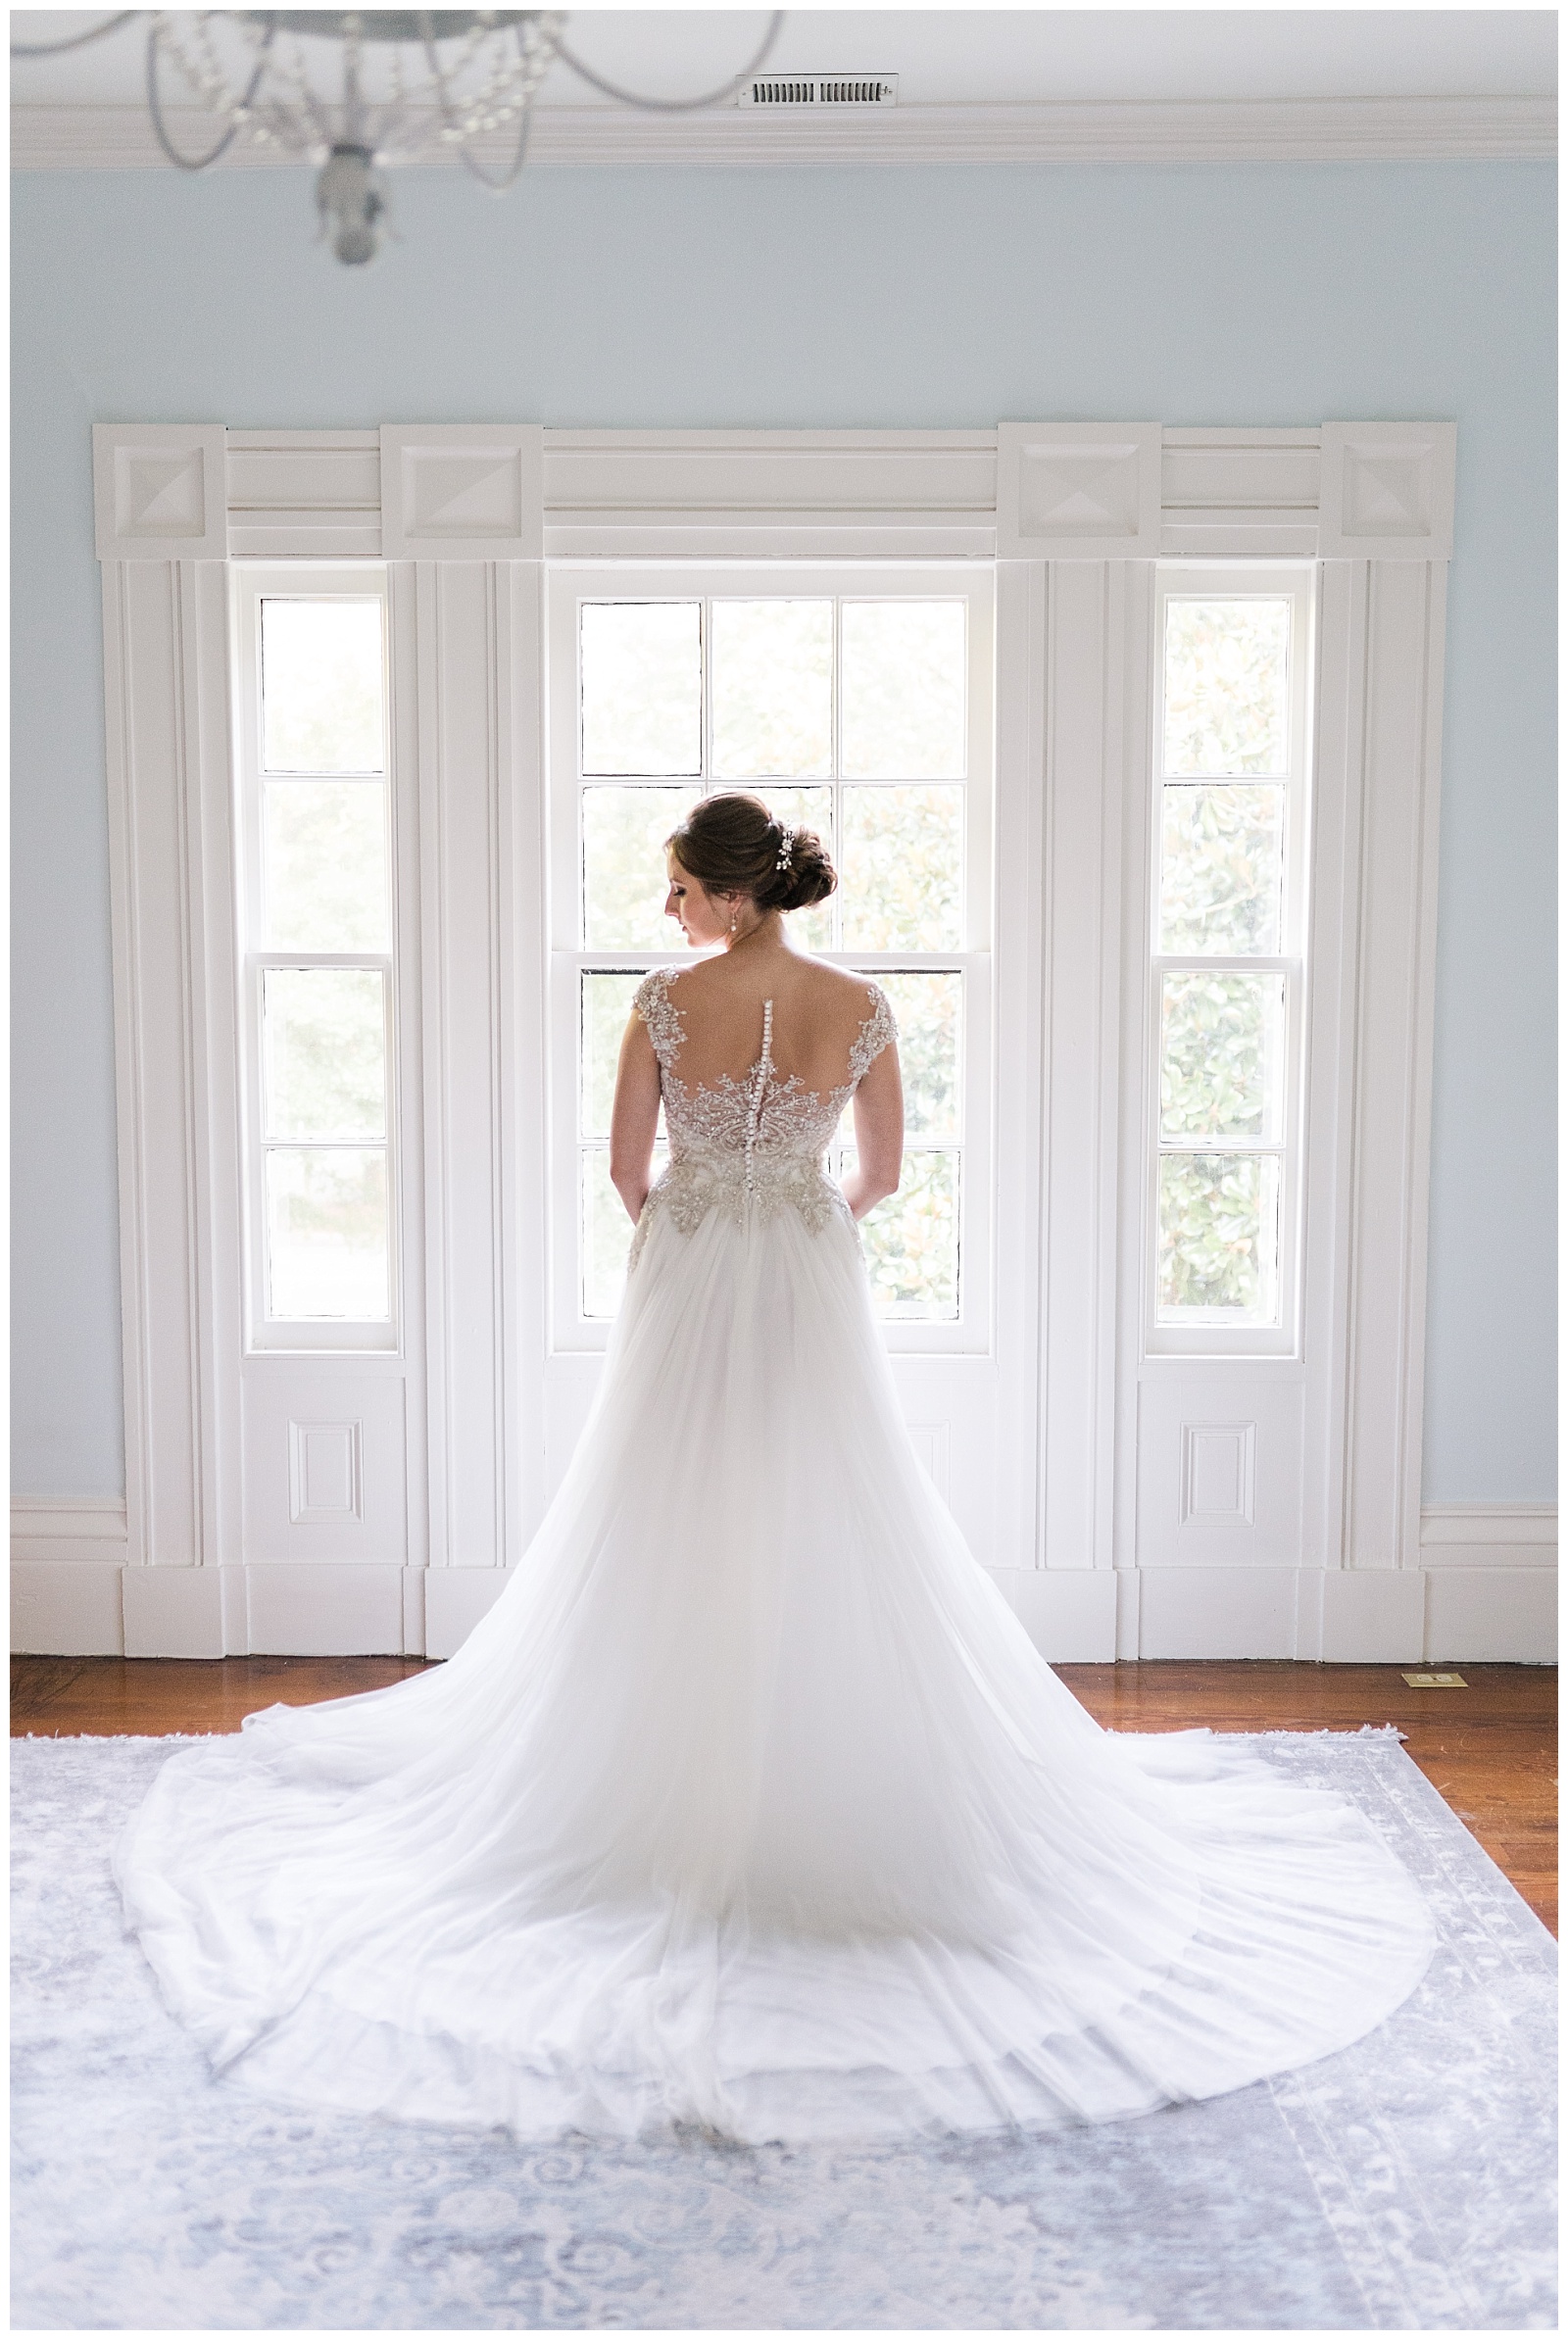 back of lace button up bridal gown in styled portrait session by bridal suite windows of historic wedding venue